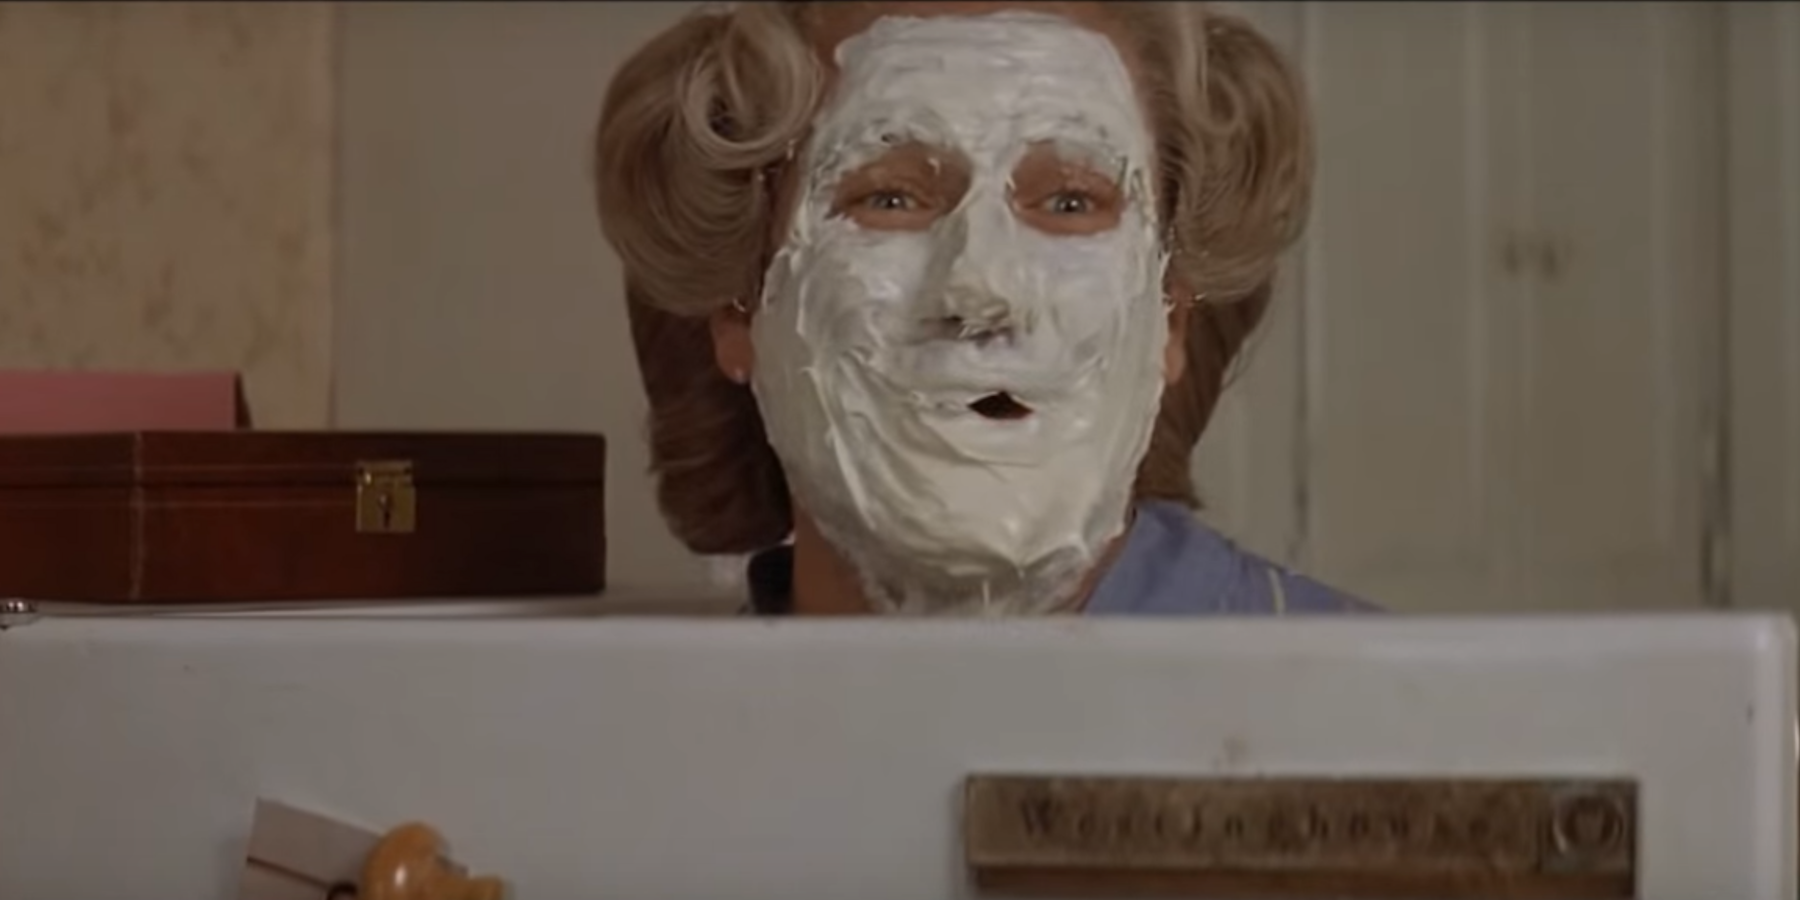 Robin Williams as Mrs Doubtfire with whipped cream on face